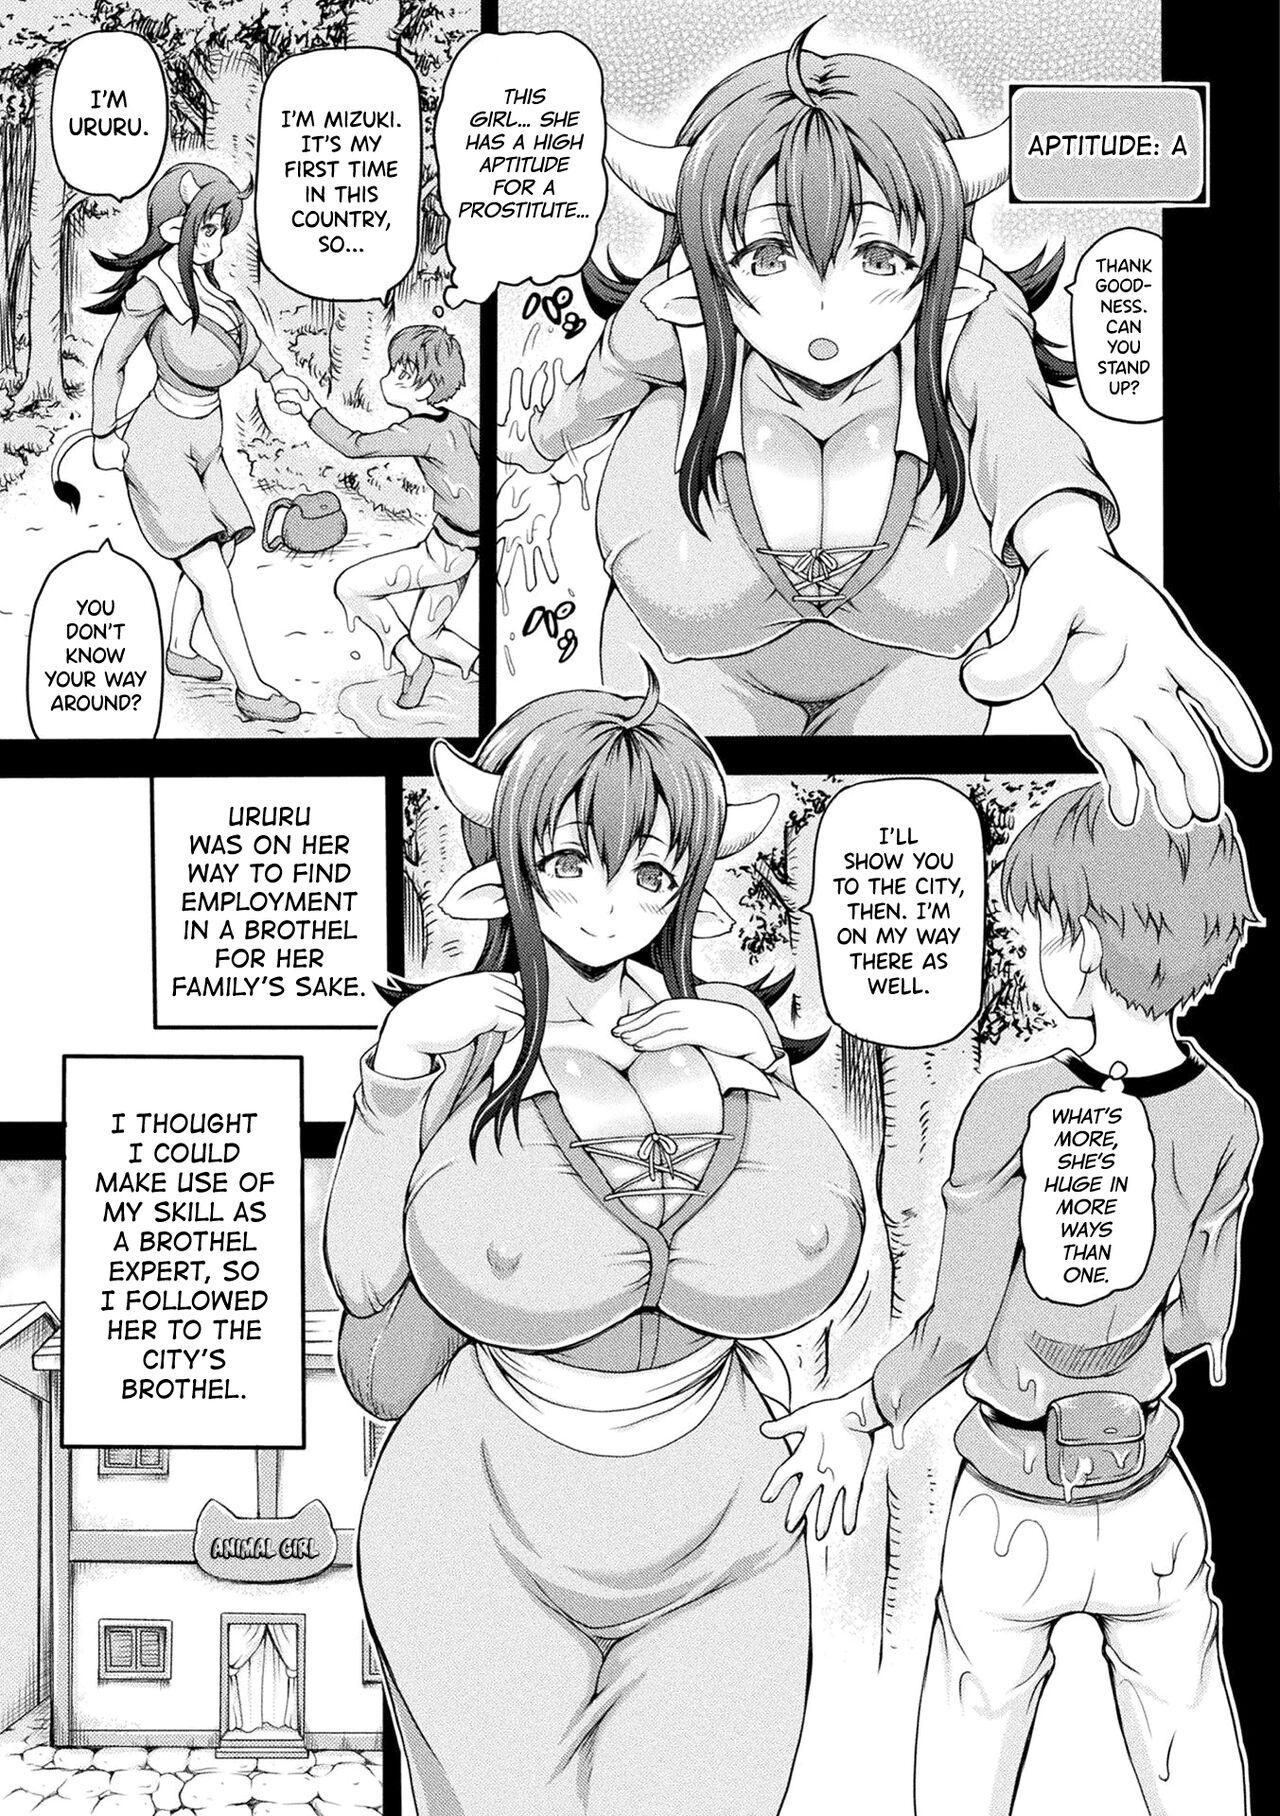 Large Isekai Shoukan Ch.1-3 Wives - Page 3